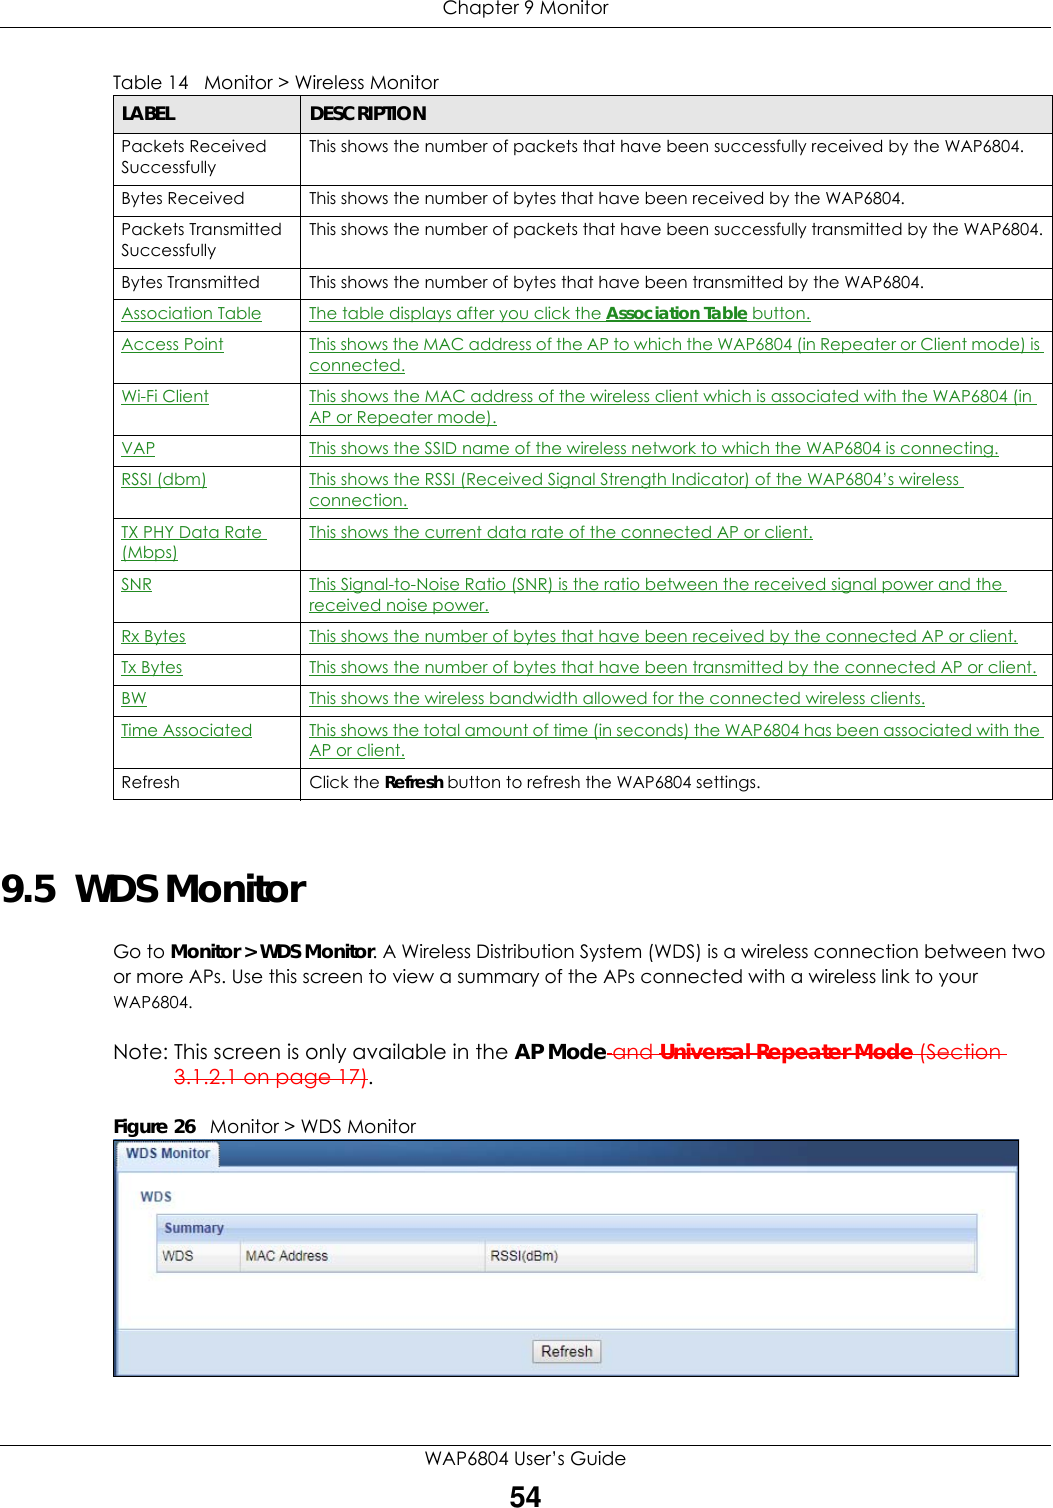 Chapter 9 MonitorWAP6804 User’s Guide549.5  WDS MonitorGo to Monitor &gt; WDS Monitor. A Wireless Distribution System (WDS) is a wireless connection between two or more APs. Use this screen to view a summary of the APs connected with a wireless link to your WAP6804. Note: This screen is only available in the AP Mode and Universal Repeater Mode (Section 3.1.2.1 on page 17).Figure 26   Monitor &gt; WDS MonitorPackets Received SuccessfullyThis shows the number of packets that have been successfully received by the WAP6804.Bytes Received This shows the number of bytes that have been received by the WAP6804.Packets Transmitted SuccessfullyThis shows the number of packets that have been successfully transmitted by the WAP6804.Bytes Transmitted This shows the number of bytes that have been transmitted by the WAP6804.Association Table The table displays after you click the Association Table button.Access Point This shows the MAC address of the AP to which the WAP6804 (in Repeater or Client mode) is connected.Wi-Fi Client This shows the MAC address of the wireless client which is associated with the WAP6804 (in AP or Repeater mode).VAP This shows the SSID name of the wireless network to which the WAP6804 is connecting.RSSI (dbm) This shows the RSSI (Received Signal Strength Indicator) of the WAP6804’s wireless connection.TX PHY Data Rate (Mbps)This shows the current data rate of the connected AP or client.SNR This Signal-to-Noise Ratio (SNR) is the ratio between the received signal power and the received noise power.Rx Bytes This shows the number of bytes that have been received by the connected AP or client.Tx Bytes This shows the number of bytes that have been transmitted by the connected AP or client.BW This shows the wireless bandwidth allowed for the connected wireless clients.Time Associated This shows the total amount of time (in seconds) the WAP6804 has been associated with the AP or client.Refresh Click the Refresh button to refresh the WAP6804 settings.Table 14   Monitor &gt; Wireless MonitorLABEL DESCRIPTION